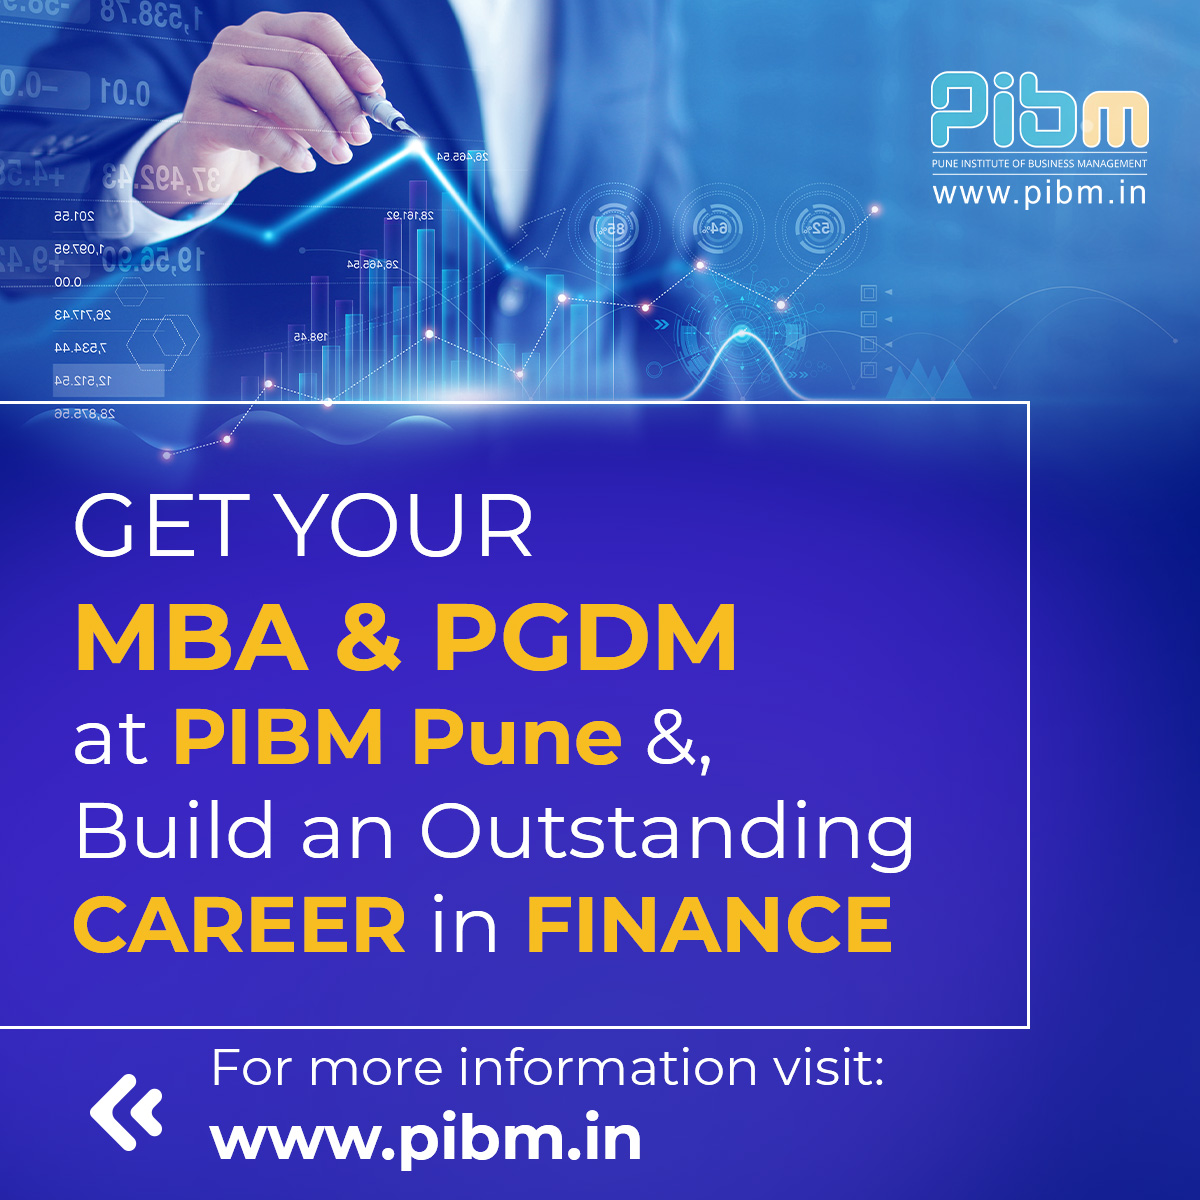 Uncover 12 dream companies for finance graduates from PIBM Pune!

#PIBMPune #MBA #PGDM #Finance #campusplacements #placements #MBAfinance #HighPayingJobs #DreamCareer